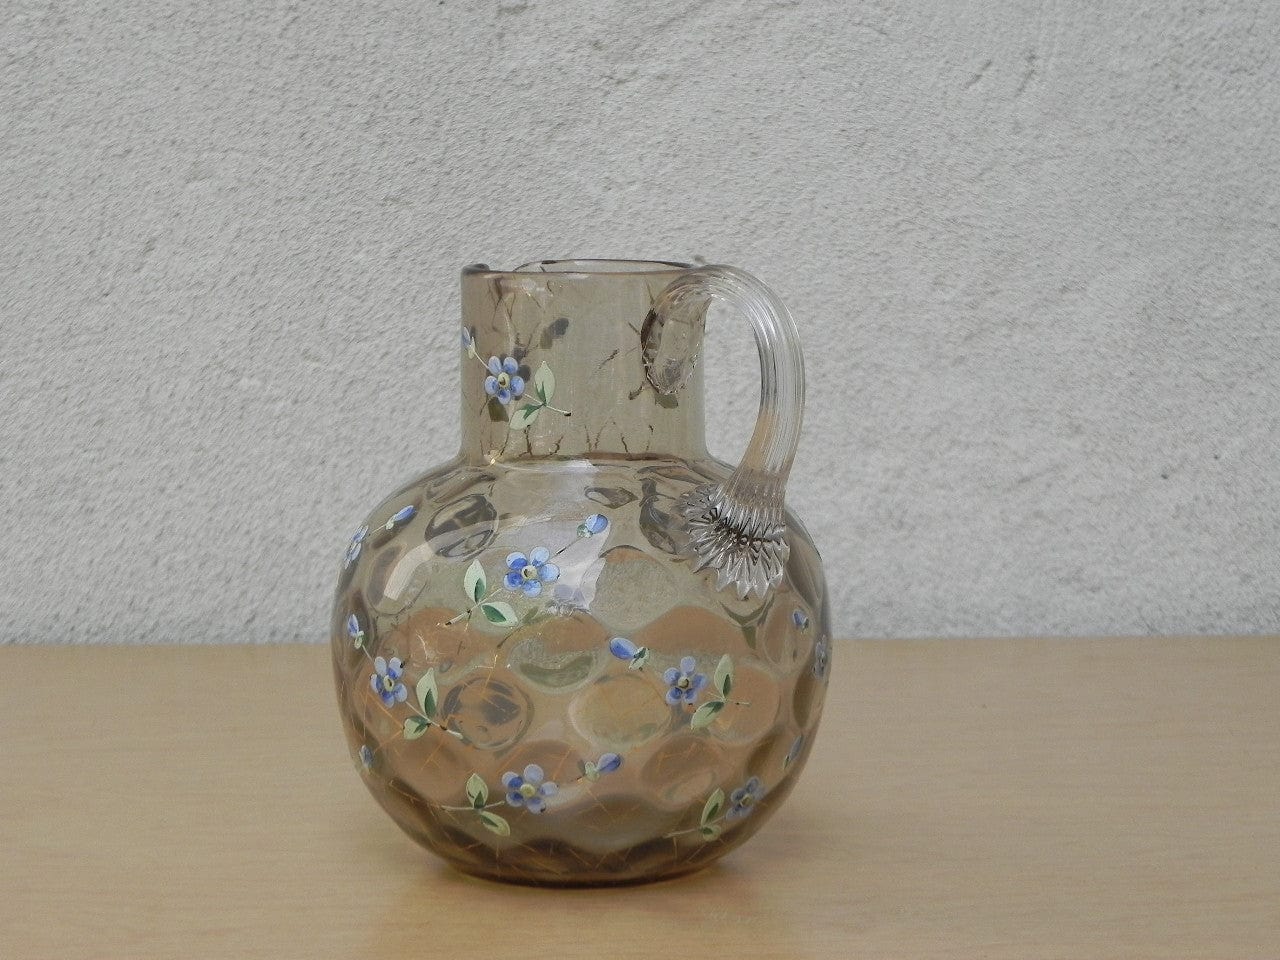 https://www.mikesmcm.com/cdn/shop/files/i-like-mike-s-mid-century-modern-wall-decor-art-small-round-honeycomb-glass-pitcher-with-hand-painted-blue-flowers-6863814951000_2000x.JPG?v=1690339156